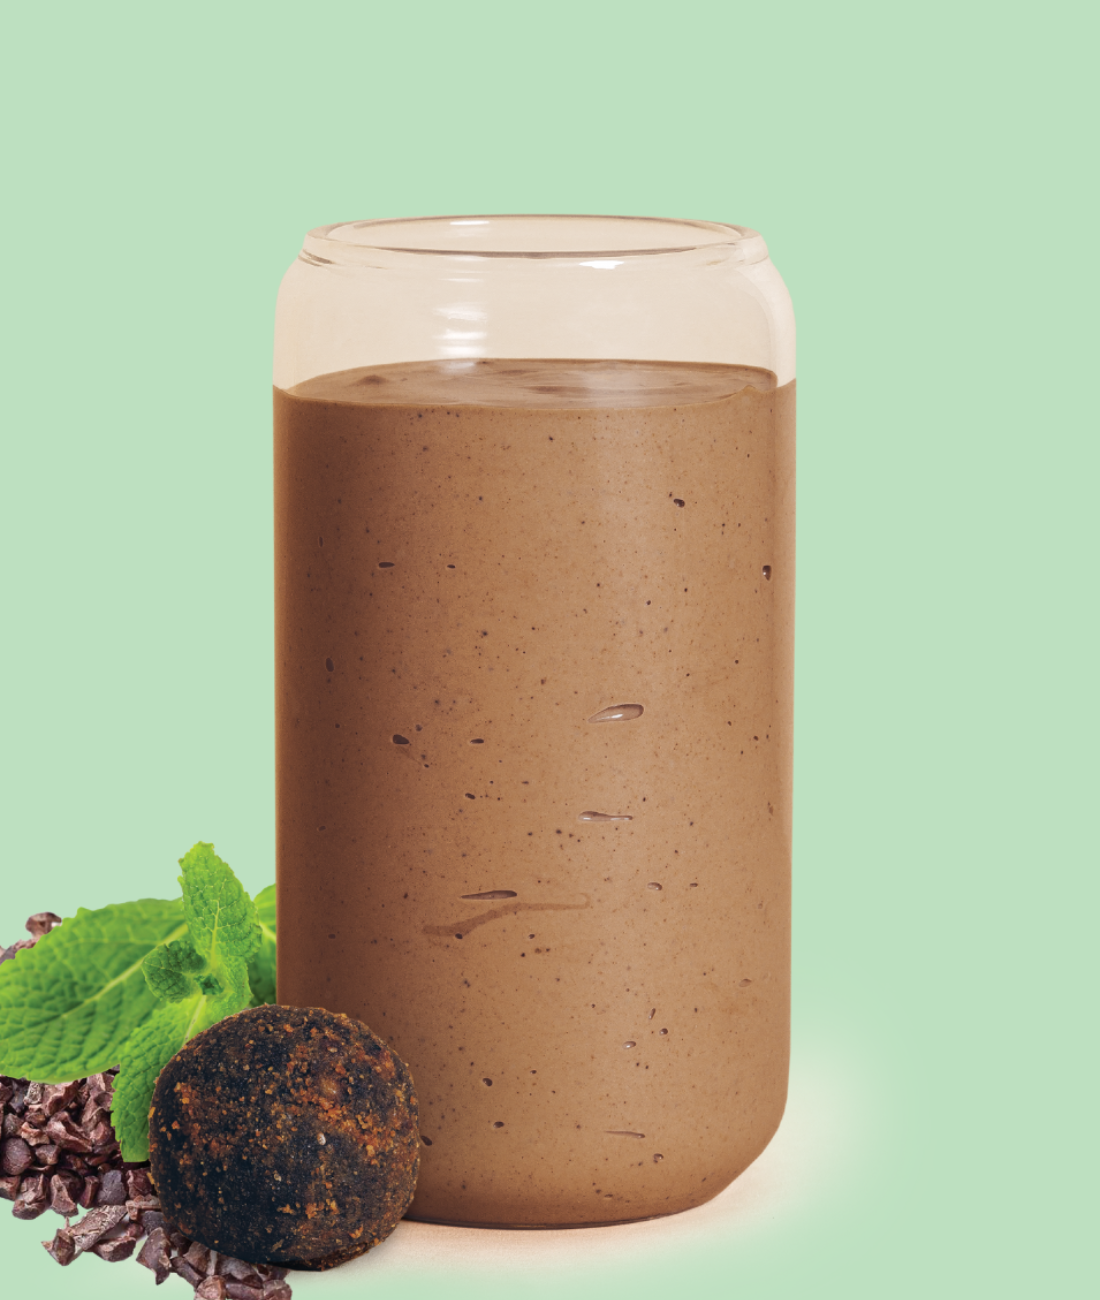 I Tried One of Those Blender Bombs—And They Made My Smoothie So